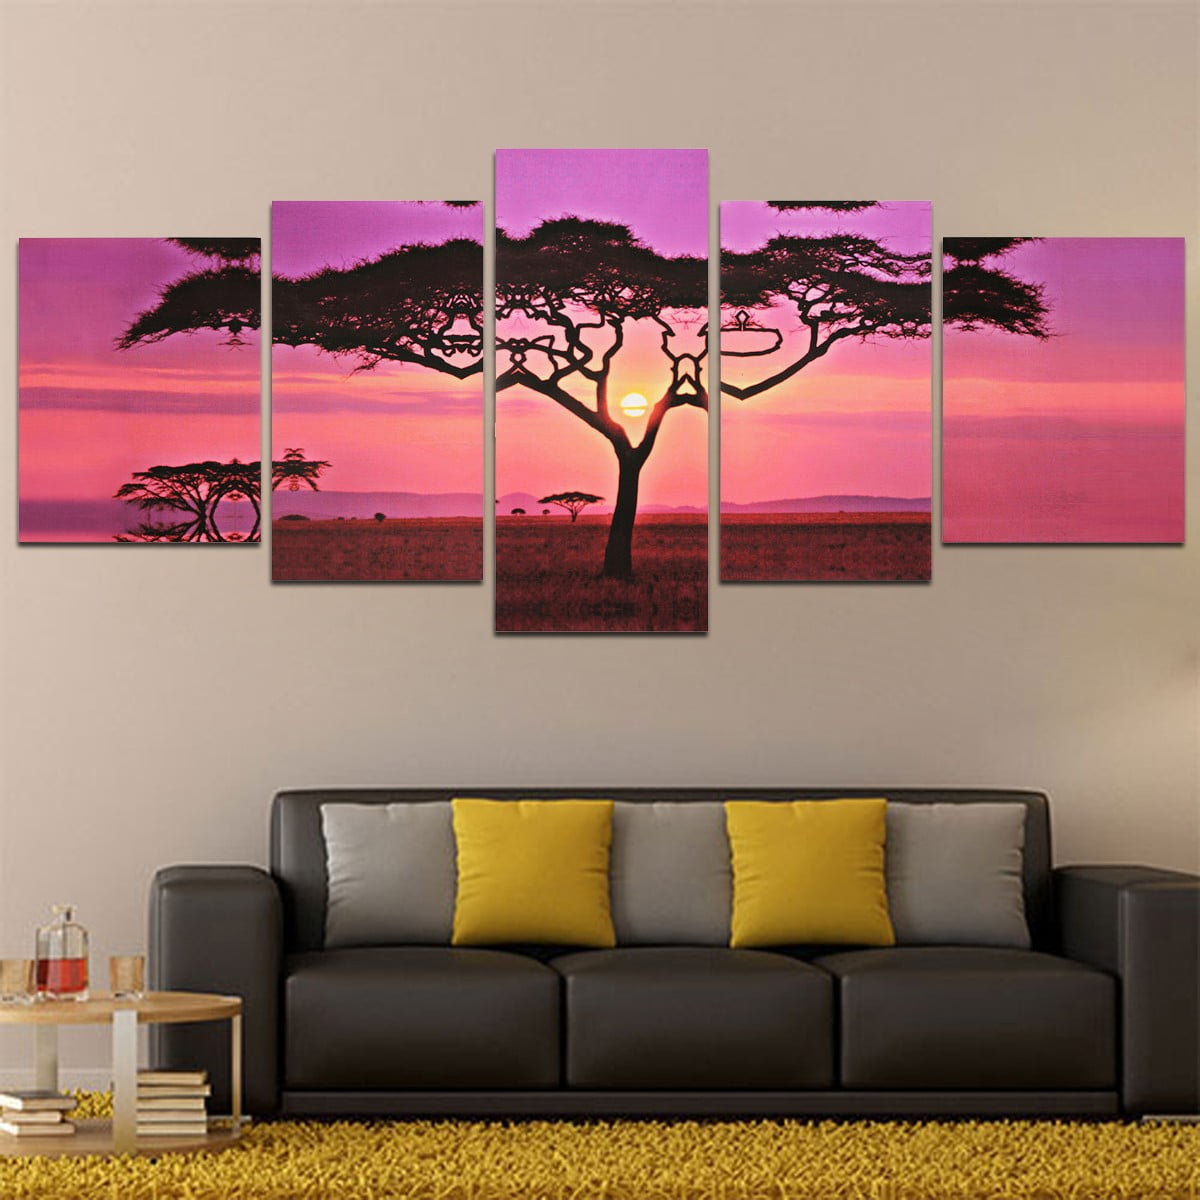 Landscapes Painting 5pc Canvas Print Nature Poster Wall Art Gift 2019 Home Decor